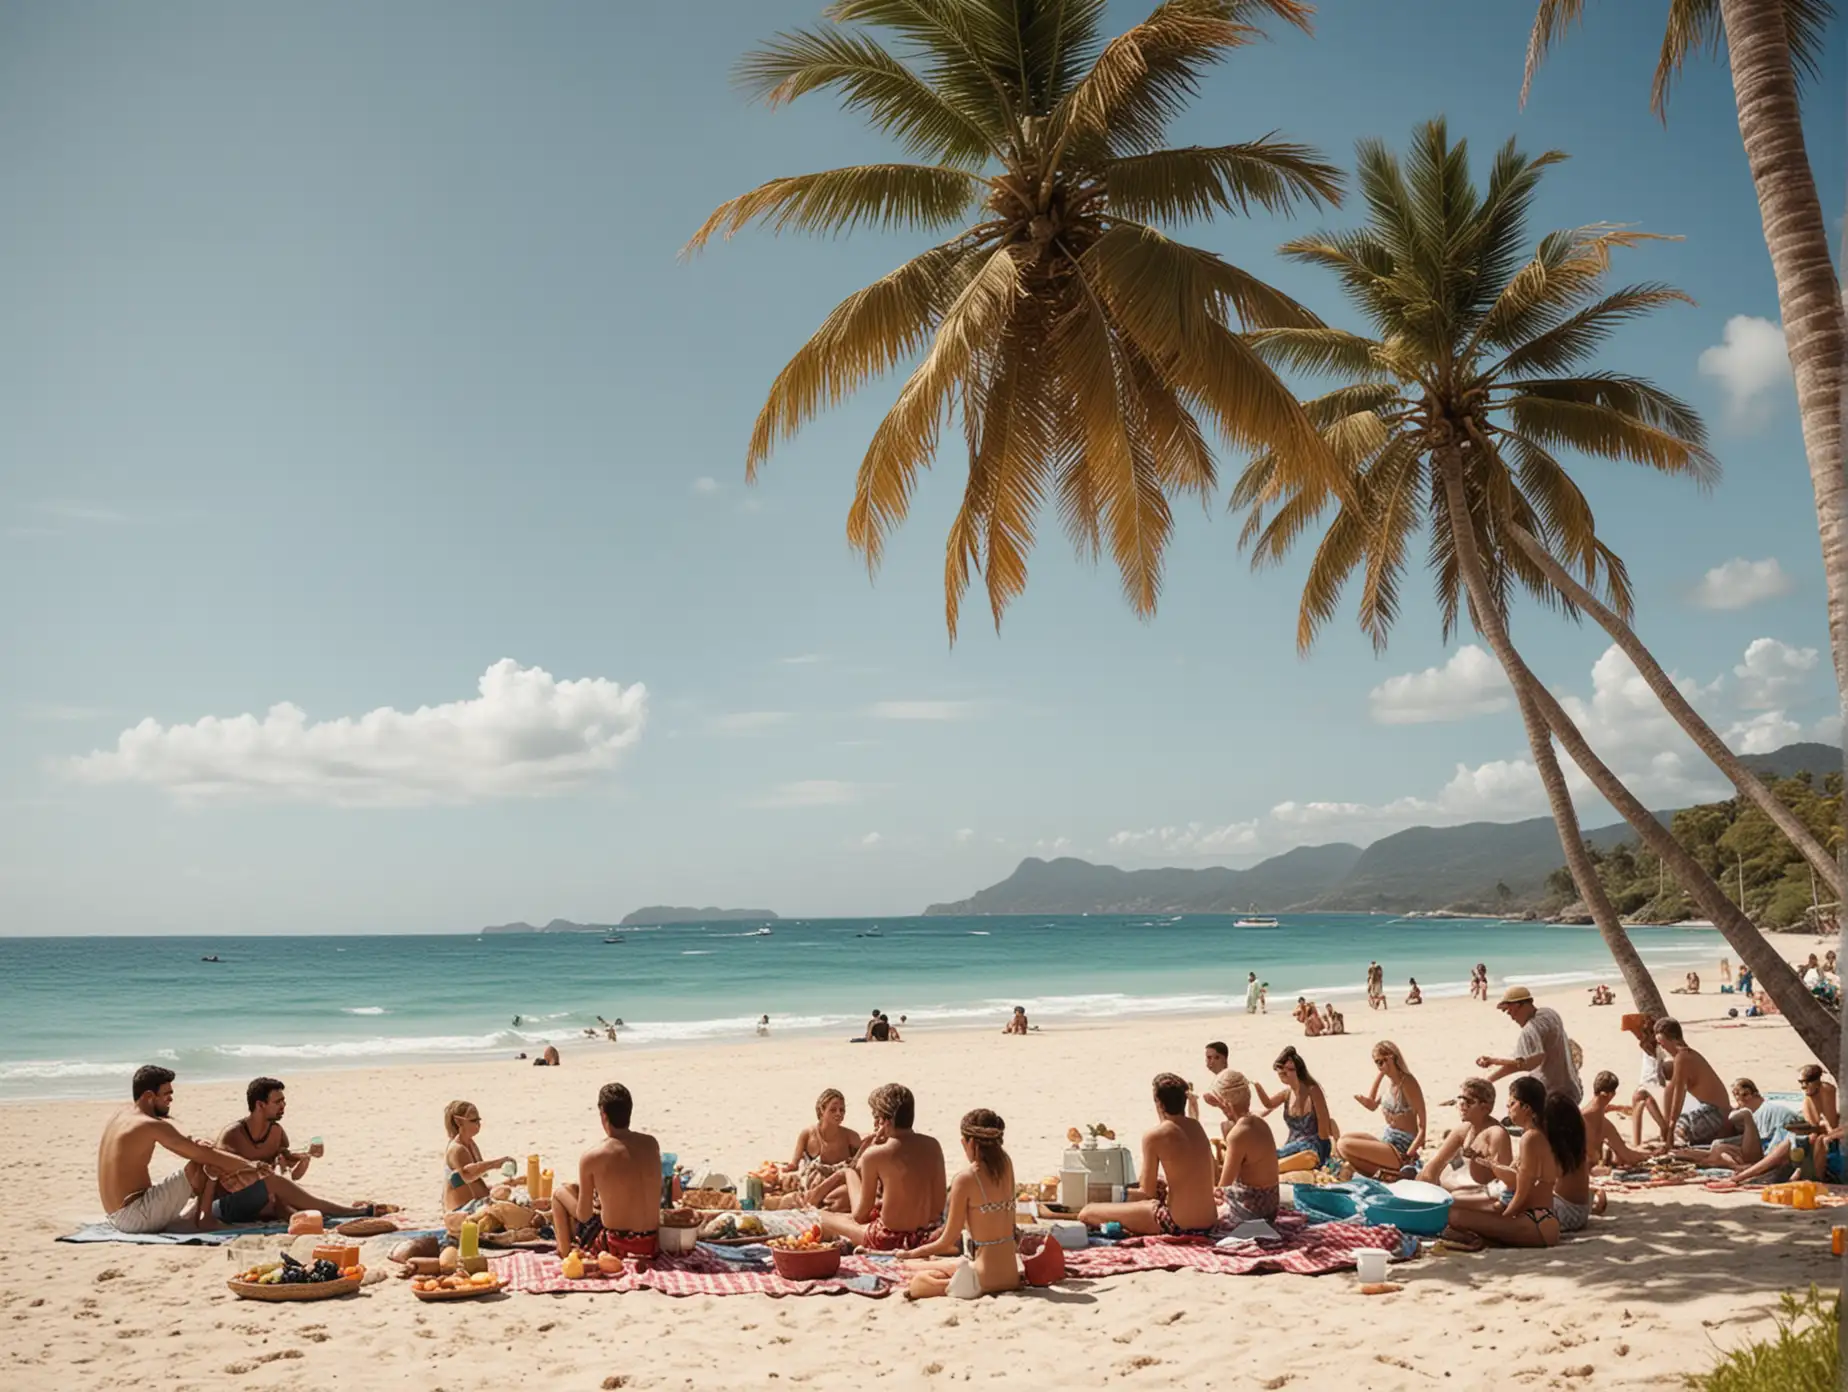 people on a tropical beach having a picnic